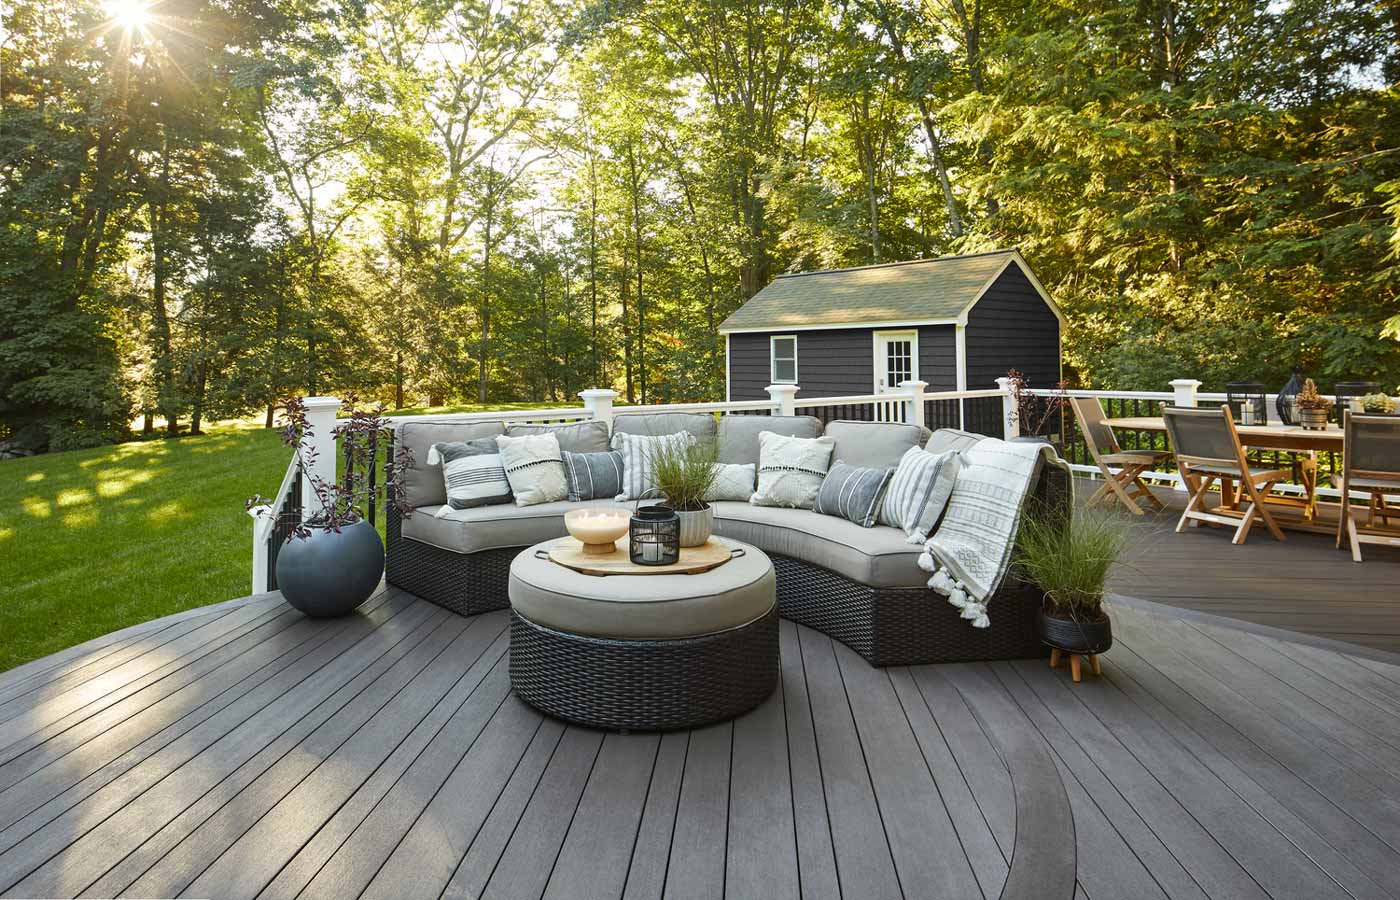 Composite deck with striking deck board pattern and patio furniture